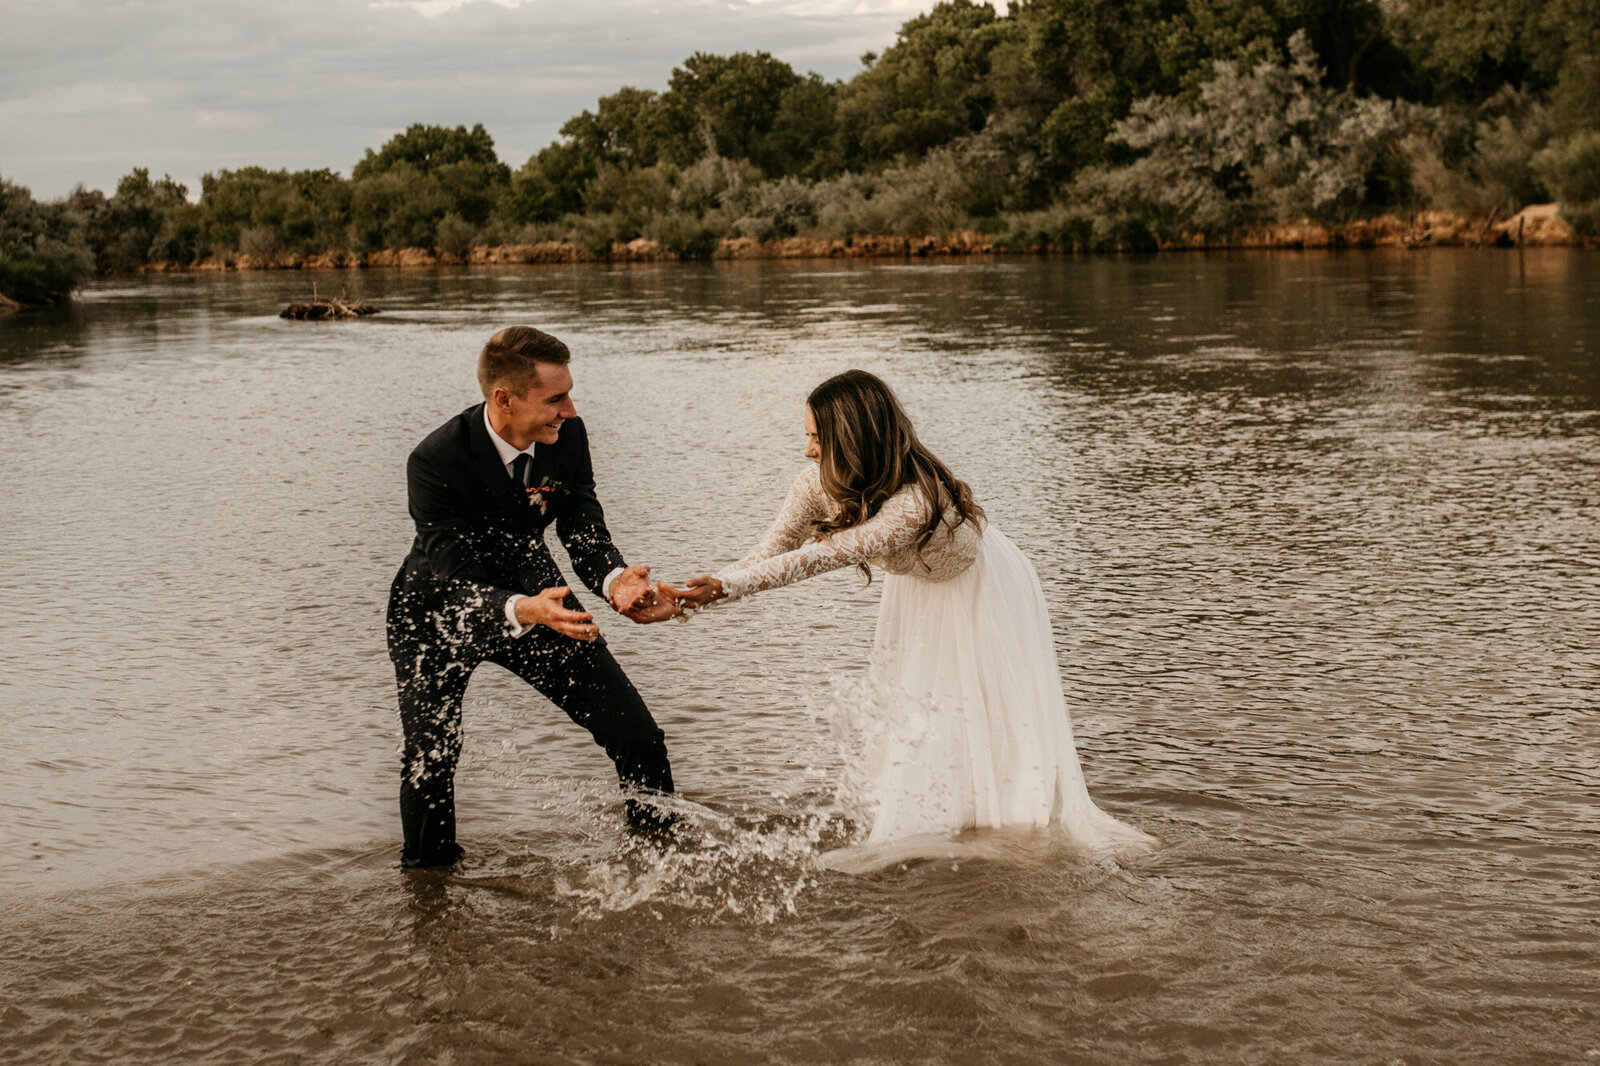 newly wedds splashing water at each other in a river